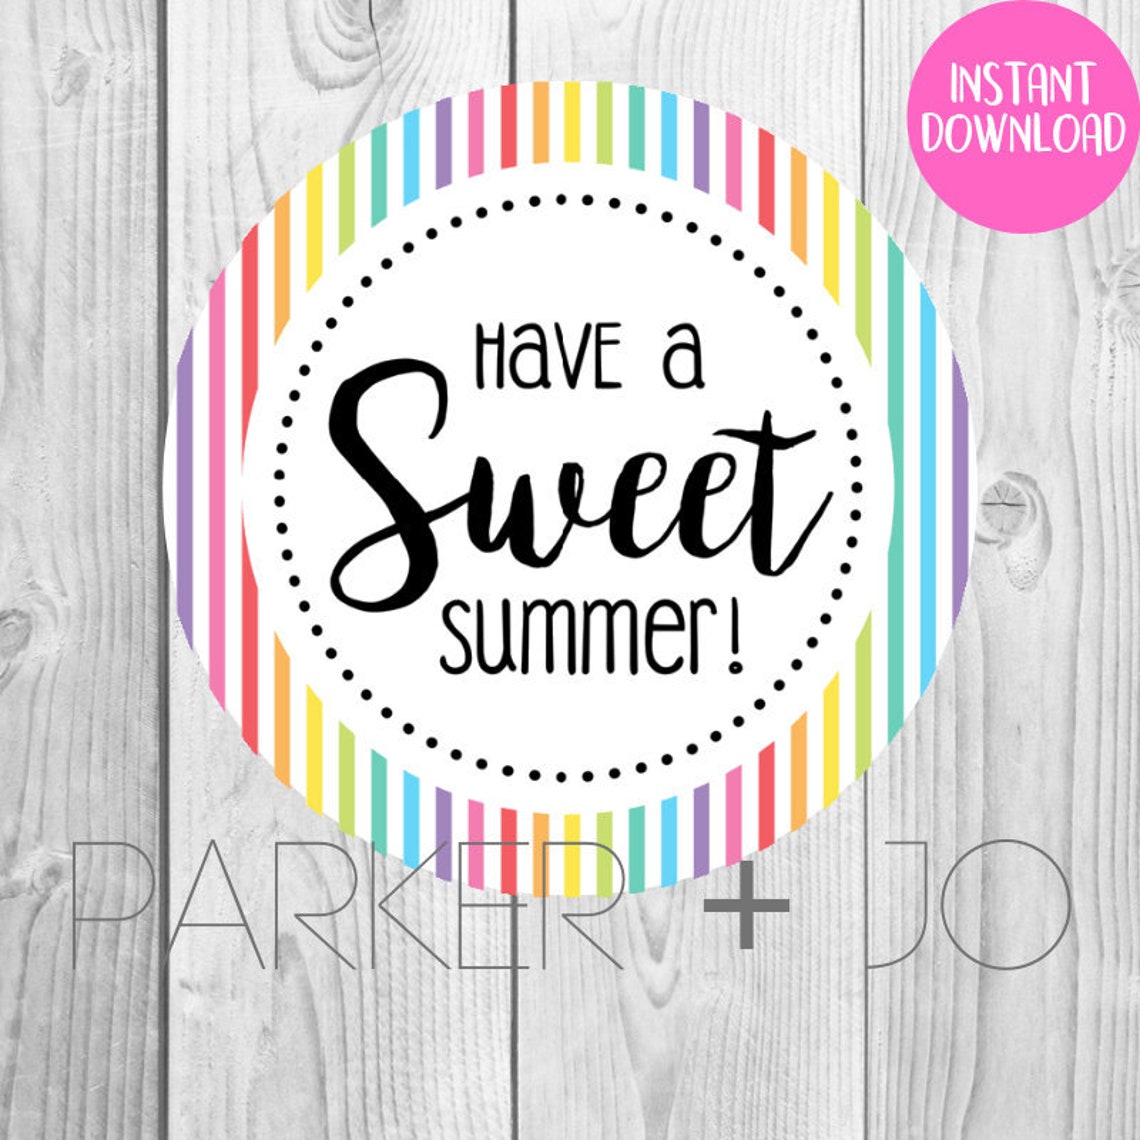 INSTANT DOWNLOAD Have a Sweet Summer / Gift Tags Teachers PTO Etsy